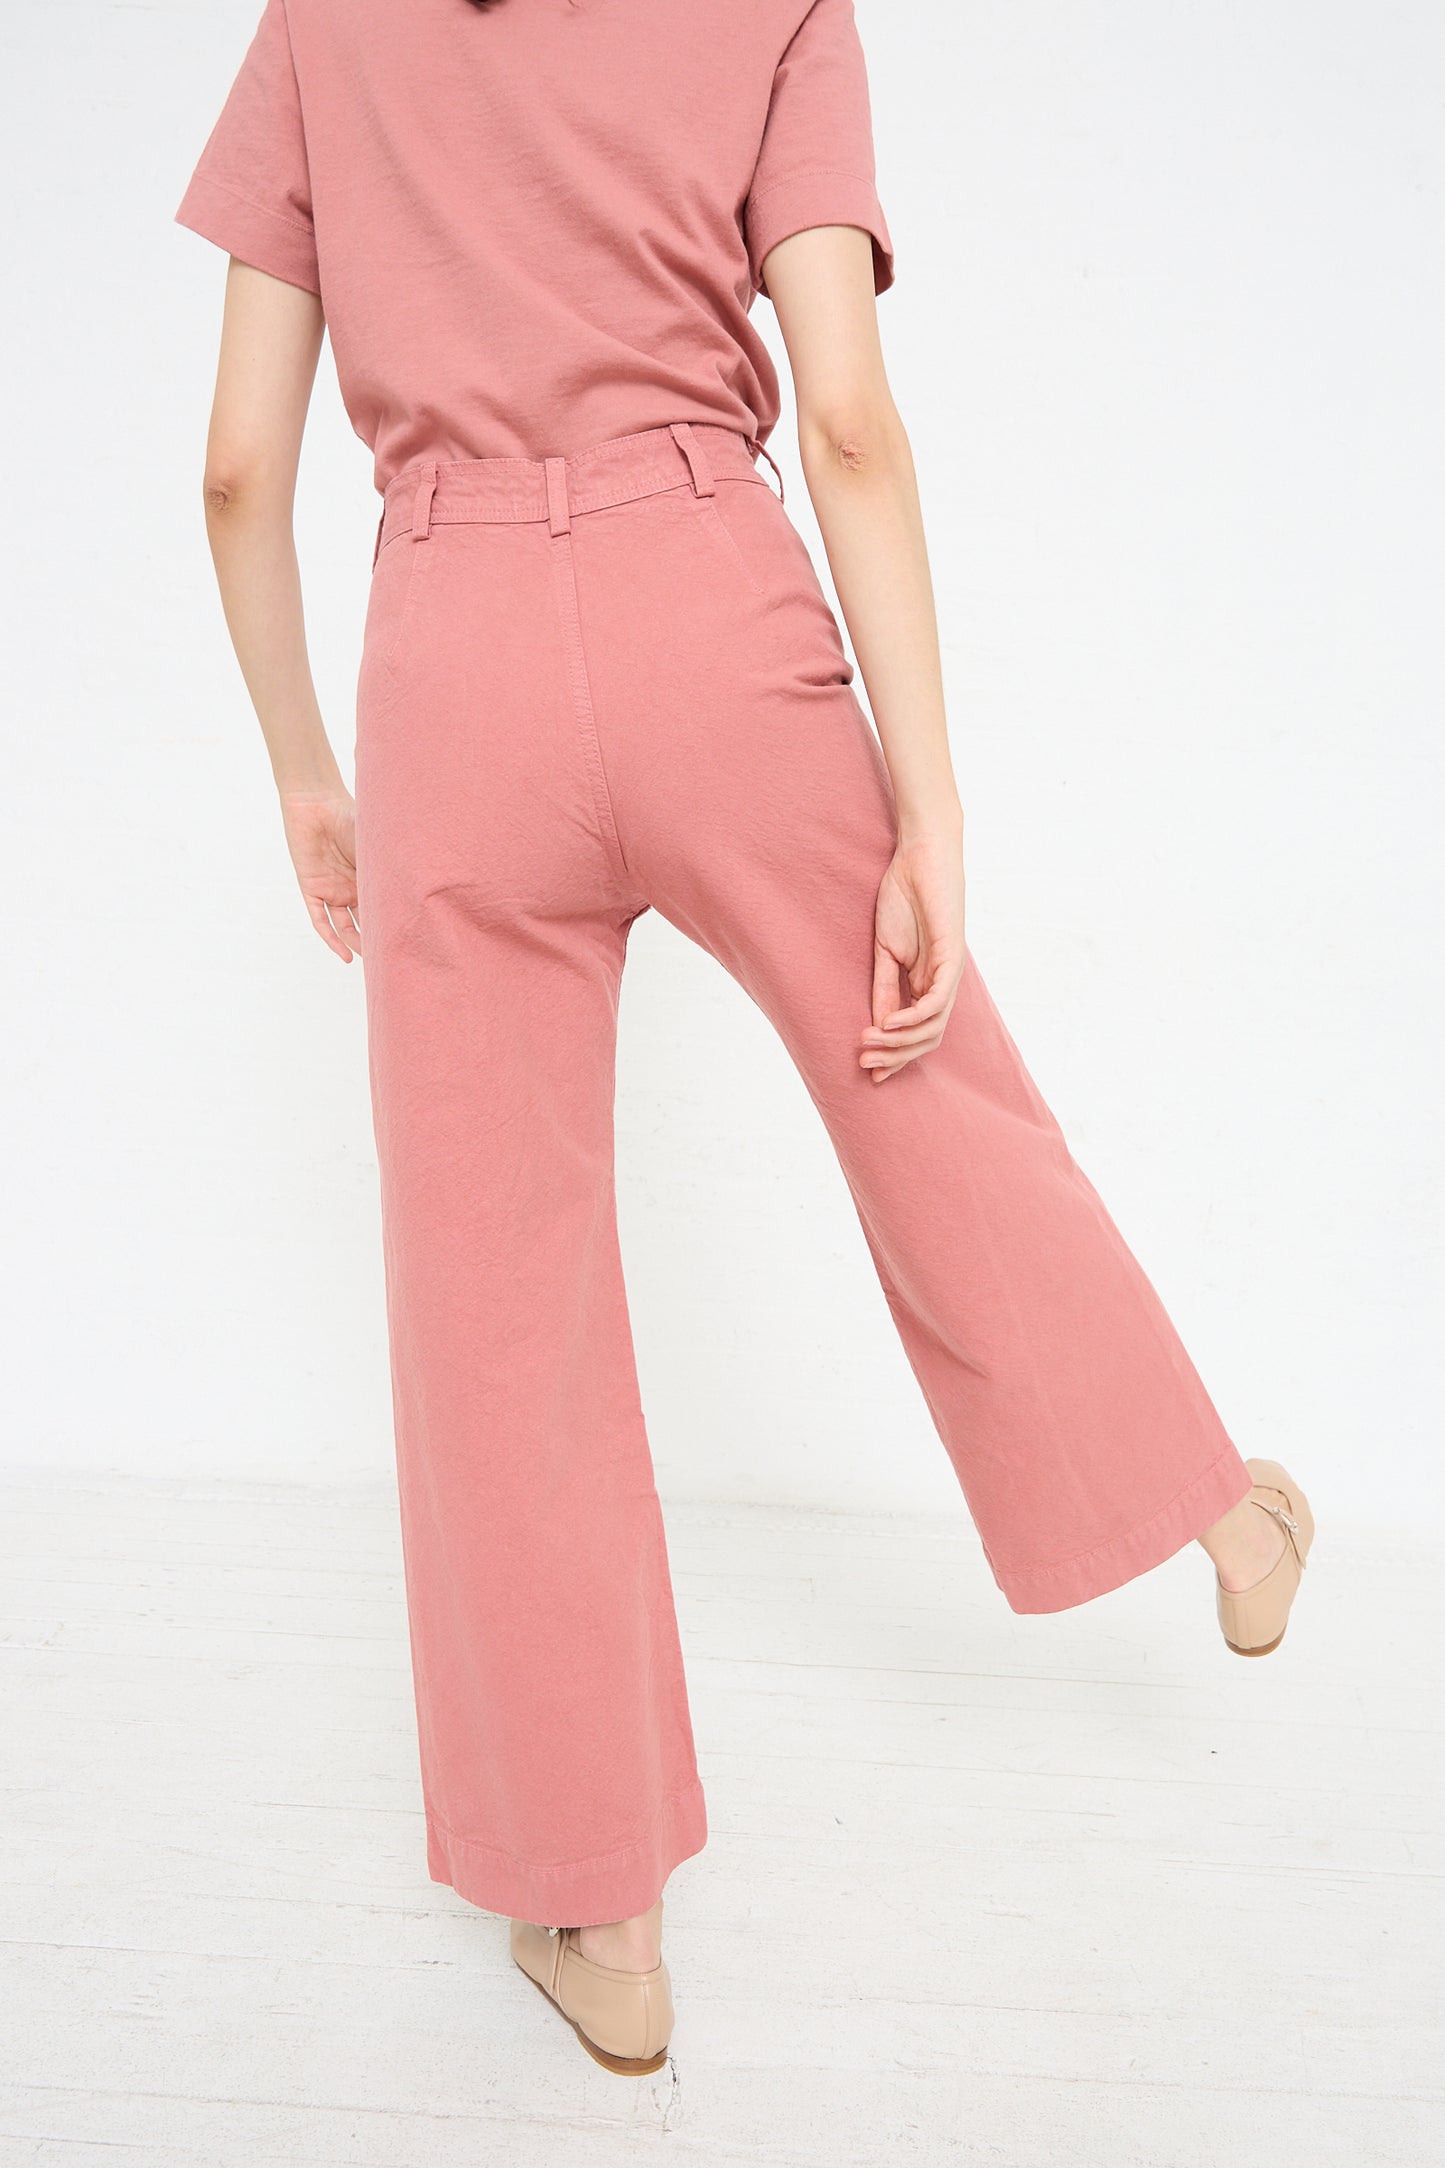 A woman wearing Sailor Pant in Dogwood by Jesse Kamm.